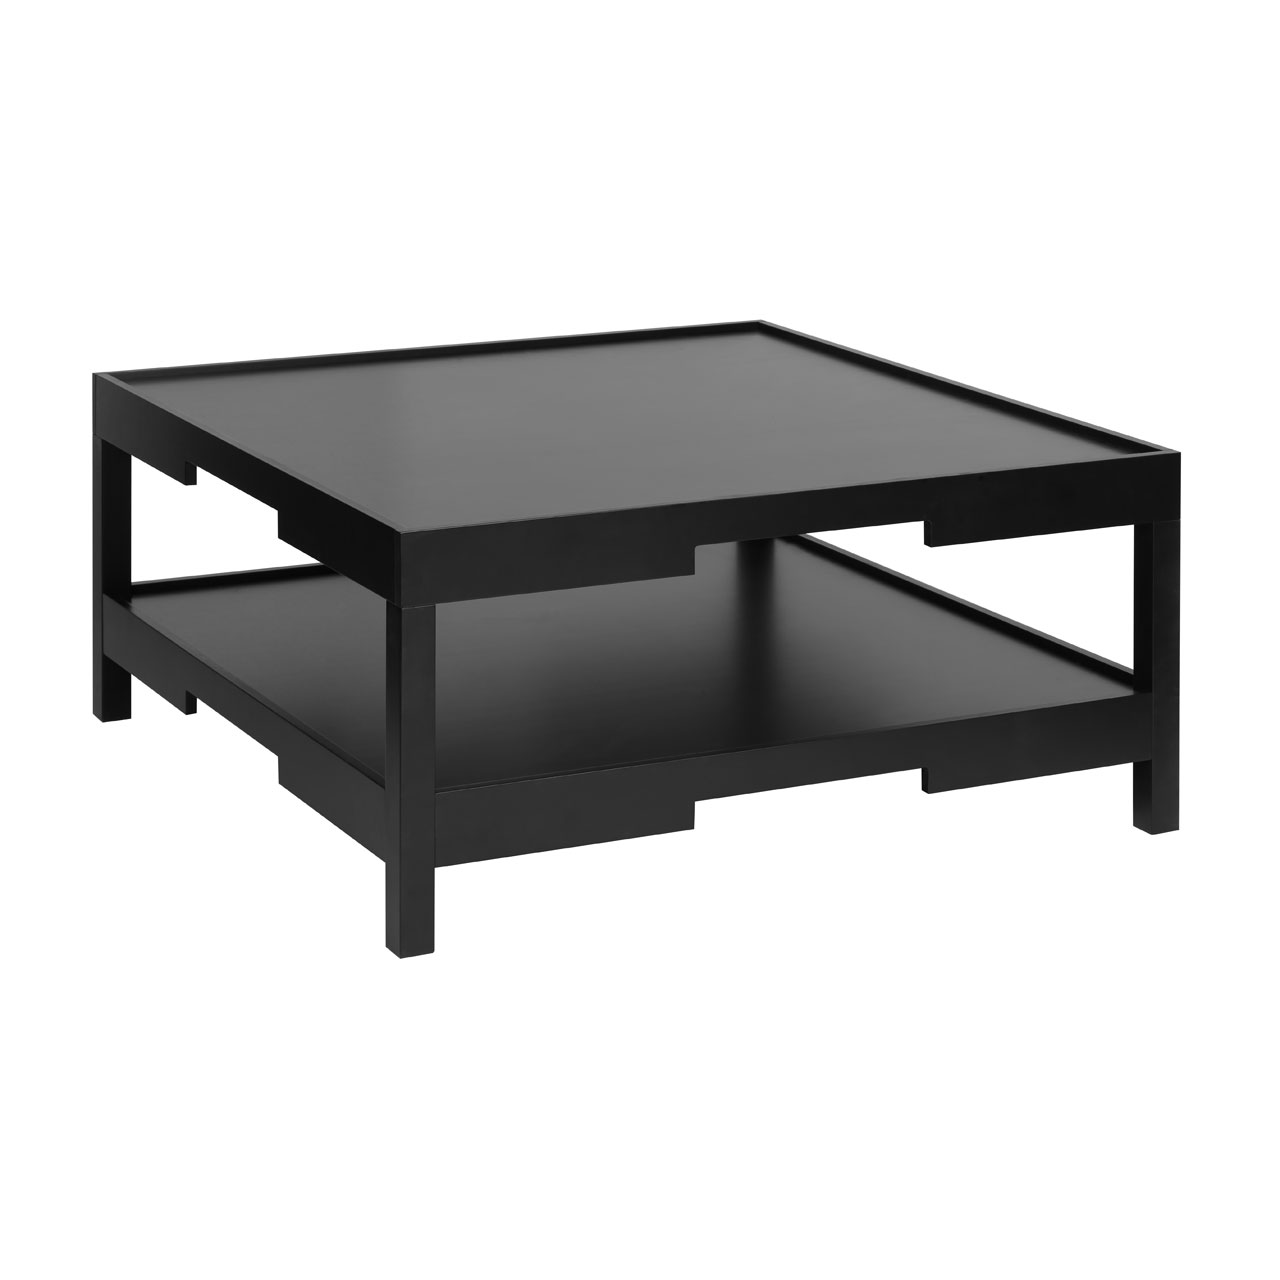 Large Black Square Coffee Table : Rustic Farmhouse Coffee Table Ext